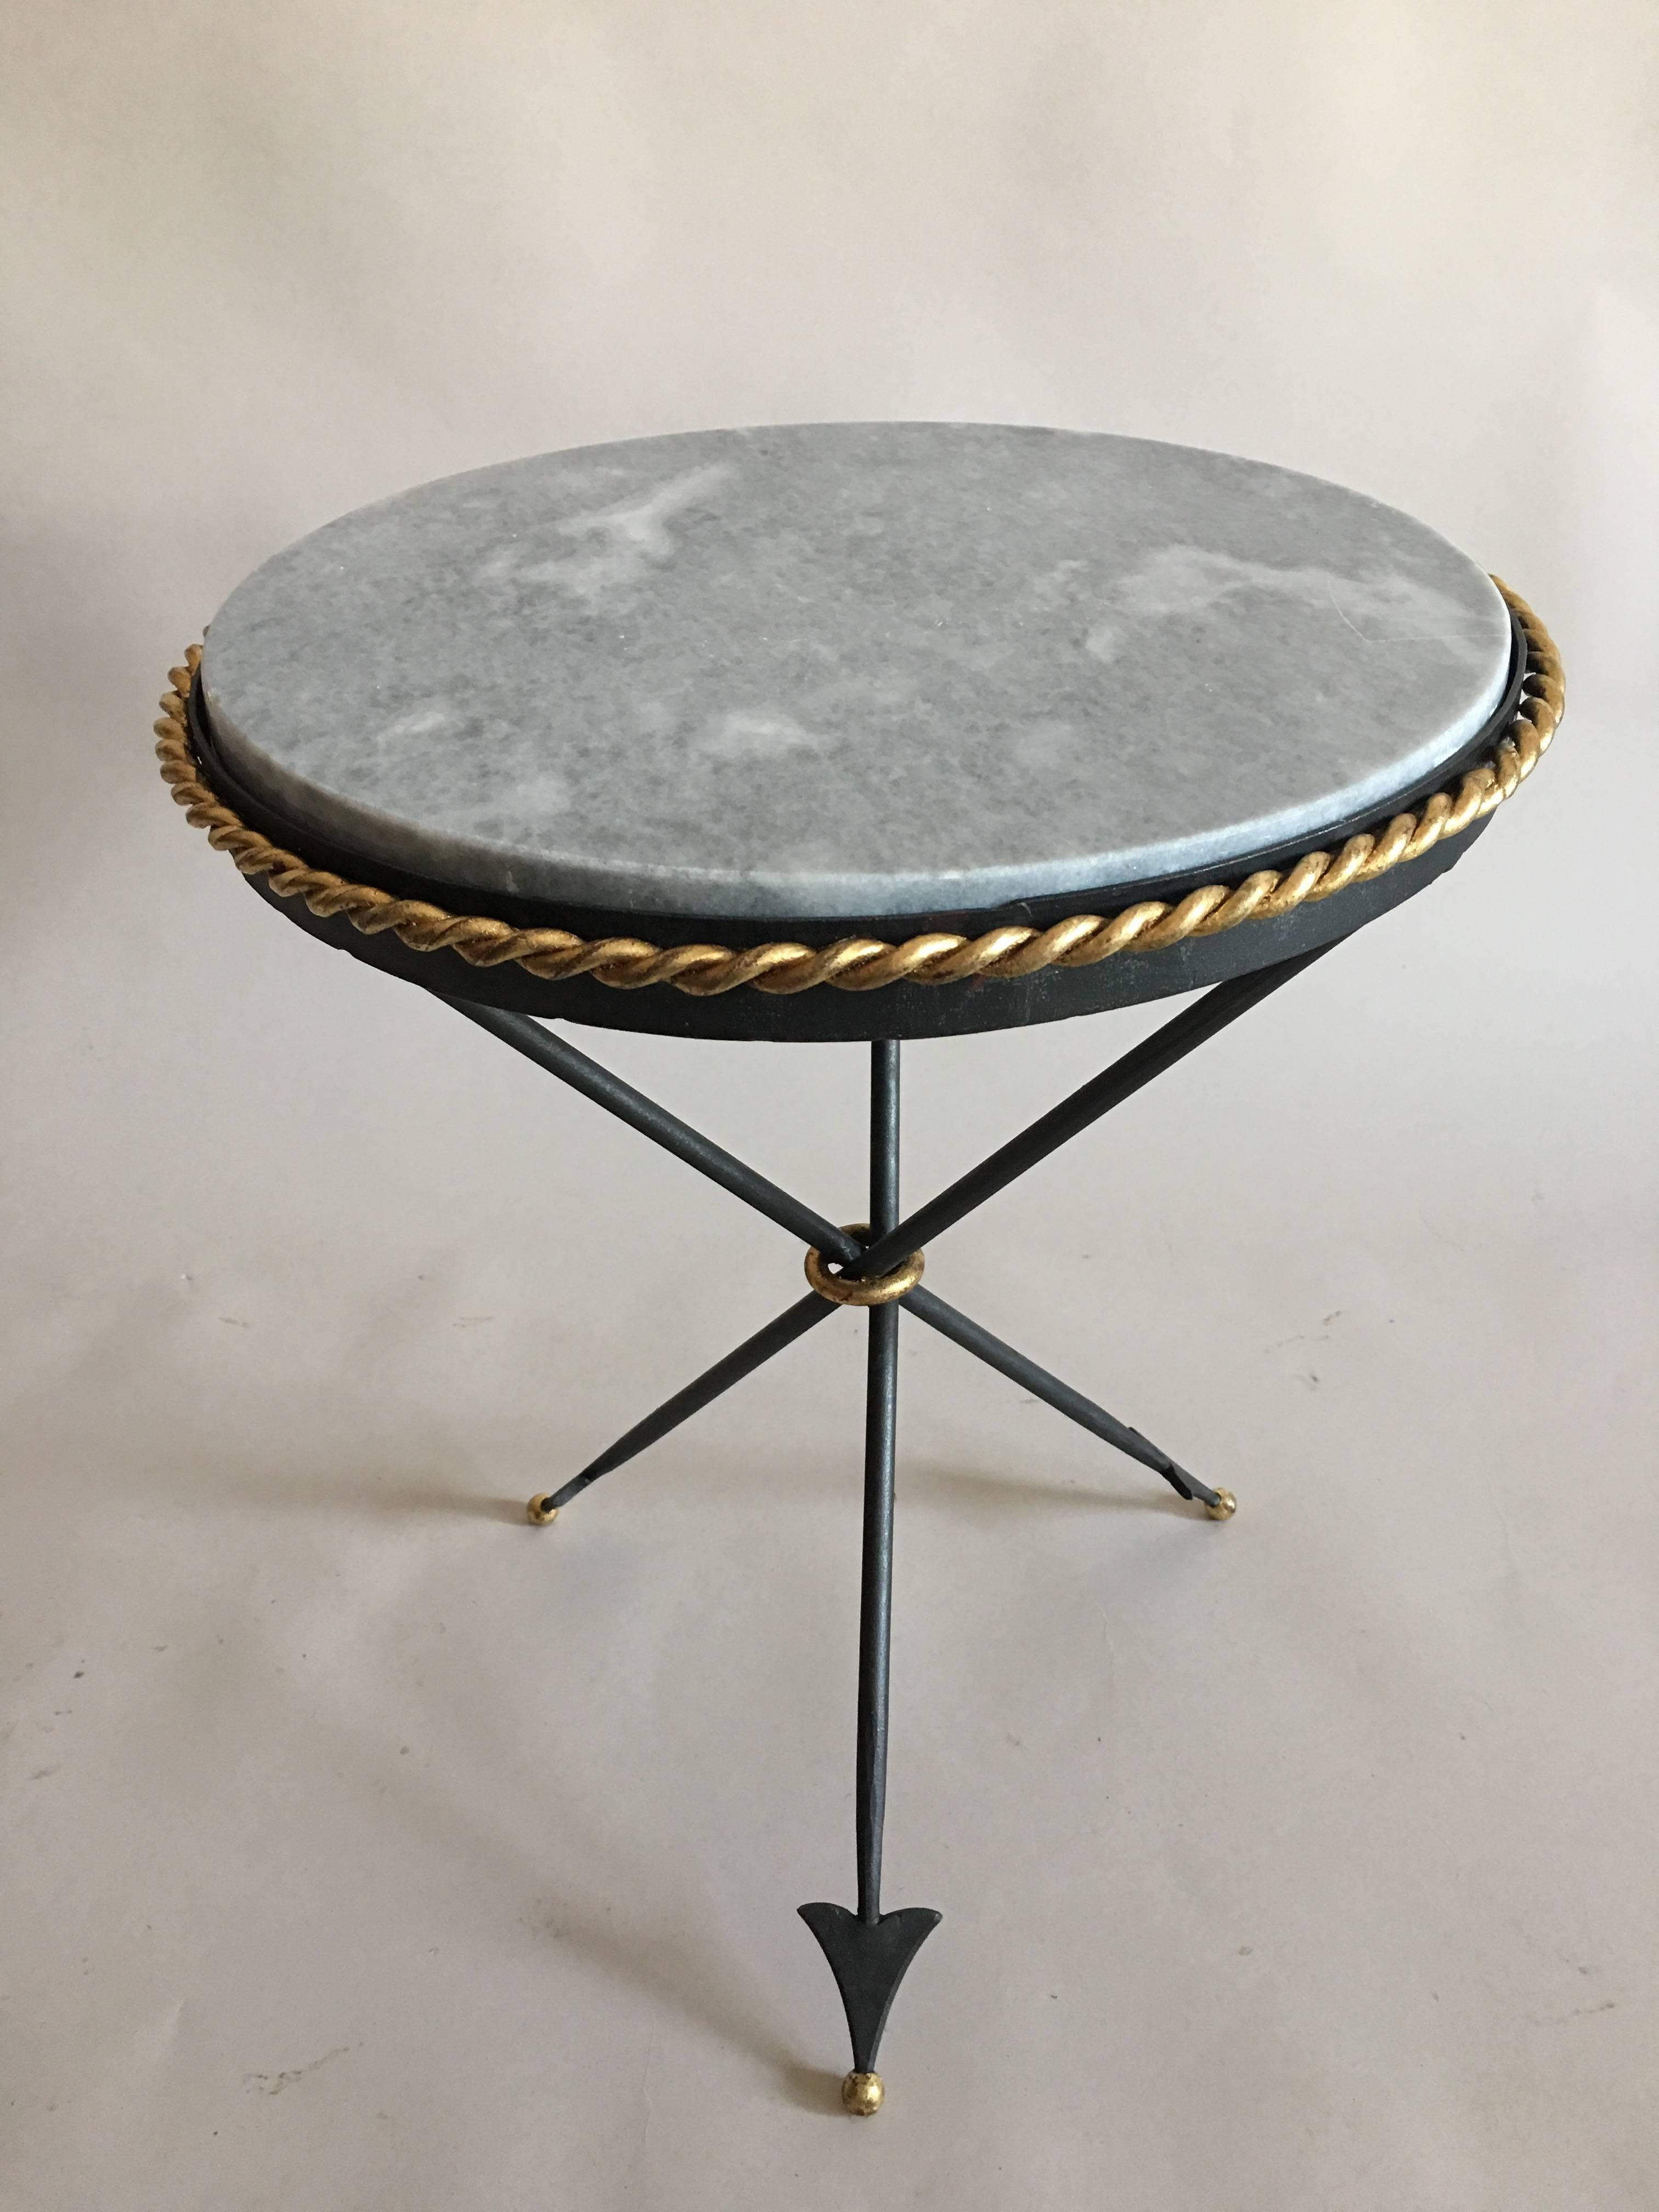 French Modern Neoclassical gueridons, side tables, end tables or nightstands in the style of Gilbert Poillerat. The pieces are composed of hand forged wrought iron, with elegant gilt roping, marble top is supported by three legs in the form of